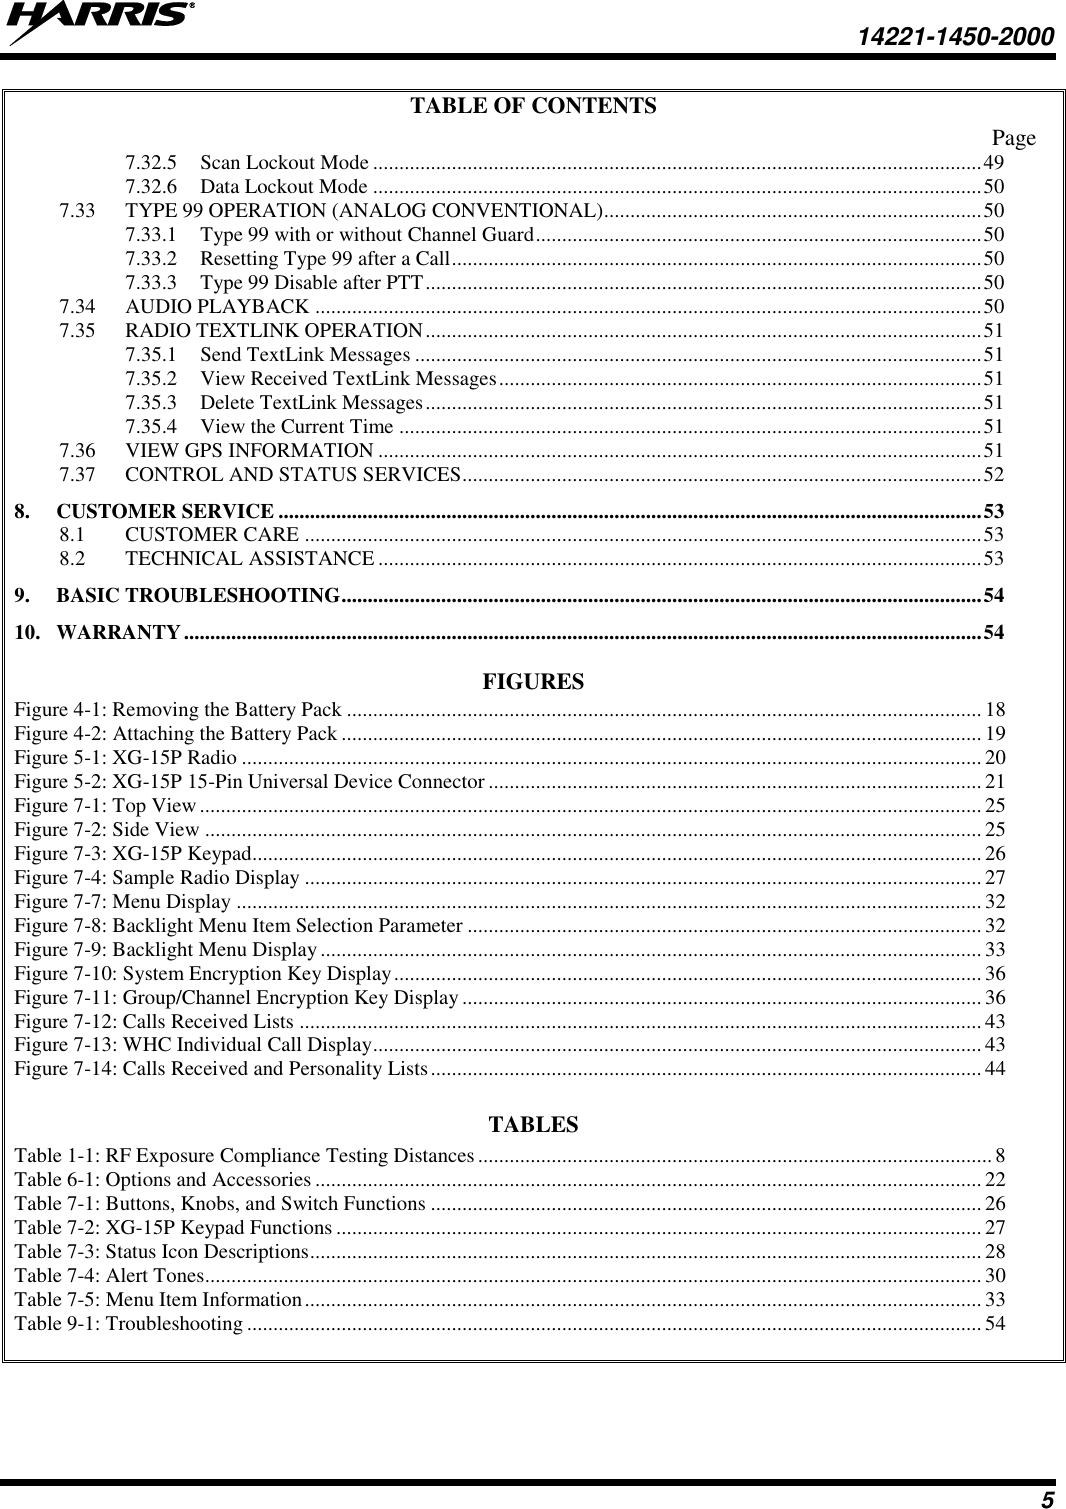   14221-1450-2000  5 TABLE OF CONTENTS Page 7.32.5 Scan Lockout Mode .................................................................................................................... 49 7.32.6 Data Lockout Mode .................................................................................................................... 50 7.33 TYPE 99 OPERATION (ANALOG CONVENTIONAL) ........................................................................ 50 7.33.1 Type 99 with or without Channel Guard ..................................................................................... 50 7.33.2 Resetting Type 99 after a Call ..................................................................................................... 50 7.33.3 Type 99 Disable after PTT .......................................................................................................... 50 7.34 AUDIO PLAYBACK ............................................................................................................................... 50 7.35 RADIO TEXTLINK OPERATION .......................................................................................................... 51 7.35.1 Send TextLink Messages ............................................................................................................ 51 7.35.2 View Received TextLink Messages ............................................................................................ 51 7.35.3 Delete TextLink Messages .......................................................................................................... 51 7.35.4 View the Current Time ............................................................................................................... 51 7.36 VIEW GPS INFORMATION ................................................................................................................... 51 7.37 CONTROL AND STATUS SERVICES ................................................................................................... 52 8. CUSTOMER SERVICE ...................................................................................................................................... 53 8.1 CUSTOMER CARE ................................................................................................................................. 53 8.2 TECHNICAL ASSISTANCE ................................................................................................................... 53 9. BASIC TROUBLESHOOTING .......................................................................................................................... 54 10. WARRANTY ........................................................................................................................................................ 54  FIGURES Figure 4-1: Removing the Battery Pack ......................................................................................................................... 18 Figure 4-2: Attaching the Battery Pack .......................................................................................................................... 19 Figure 5-1: XG-15P Radio ............................................................................................................................................. 20 Figure 5-2: XG-15P 15-Pin Universal Device Connector .............................................................................................. 21 Figure 7-1: Top View ..................................................................................................................................................... 25 Figure 7-2: Side View .................................................................................................................................................... 25 Figure 7-3: XG-15P Keypad........................................................................................................................................... 26 Figure 7-4: Sample Radio Display ................................................................................................................................. 27 Figure 7-7: Menu Display .............................................................................................................................................. 32 Figure 7-8: Backlight Menu Item Selection Parameter .................................................................................................. 32 Figure 7-9: Backlight Menu Display .............................................................................................................................. 33 Figure 7-10: System Encryption Key Display ................................................................................................................ 36 Figure 7-11: Group/Channel Encryption Key Display ................................................................................................... 36 Figure 7-12: Calls Received Lists .................................................................................................................................. 43 Figure 7-13: WHC Individual Call Display .................................................................................................................... 43 Figure 7-14: Calls Received and Personality Lists ......................................................................................................... 44  TABLES Table 1-1: RF Exposure Compliance Testing Distances .................................................................................................. 8 Table 6-1: Options and Accessories ............................................................................................................................... 22 Table 7-1: Buttons, Knobs, and Switch Functions ......................................................................................................... 26 Table 7-2: XG-15P Keypad Functions ........................................................................................................................... 27 Table 7-3: Status Icon Descriptions ................................................................................................................................ 28 Table 7-4: Alert Tones .................................................................................................................................................... 30 Table 7-5: Menu Item Information ................................................................................................................................. 33 Table 9-1: Troubleshooting ............................................................................................................................................ 54   